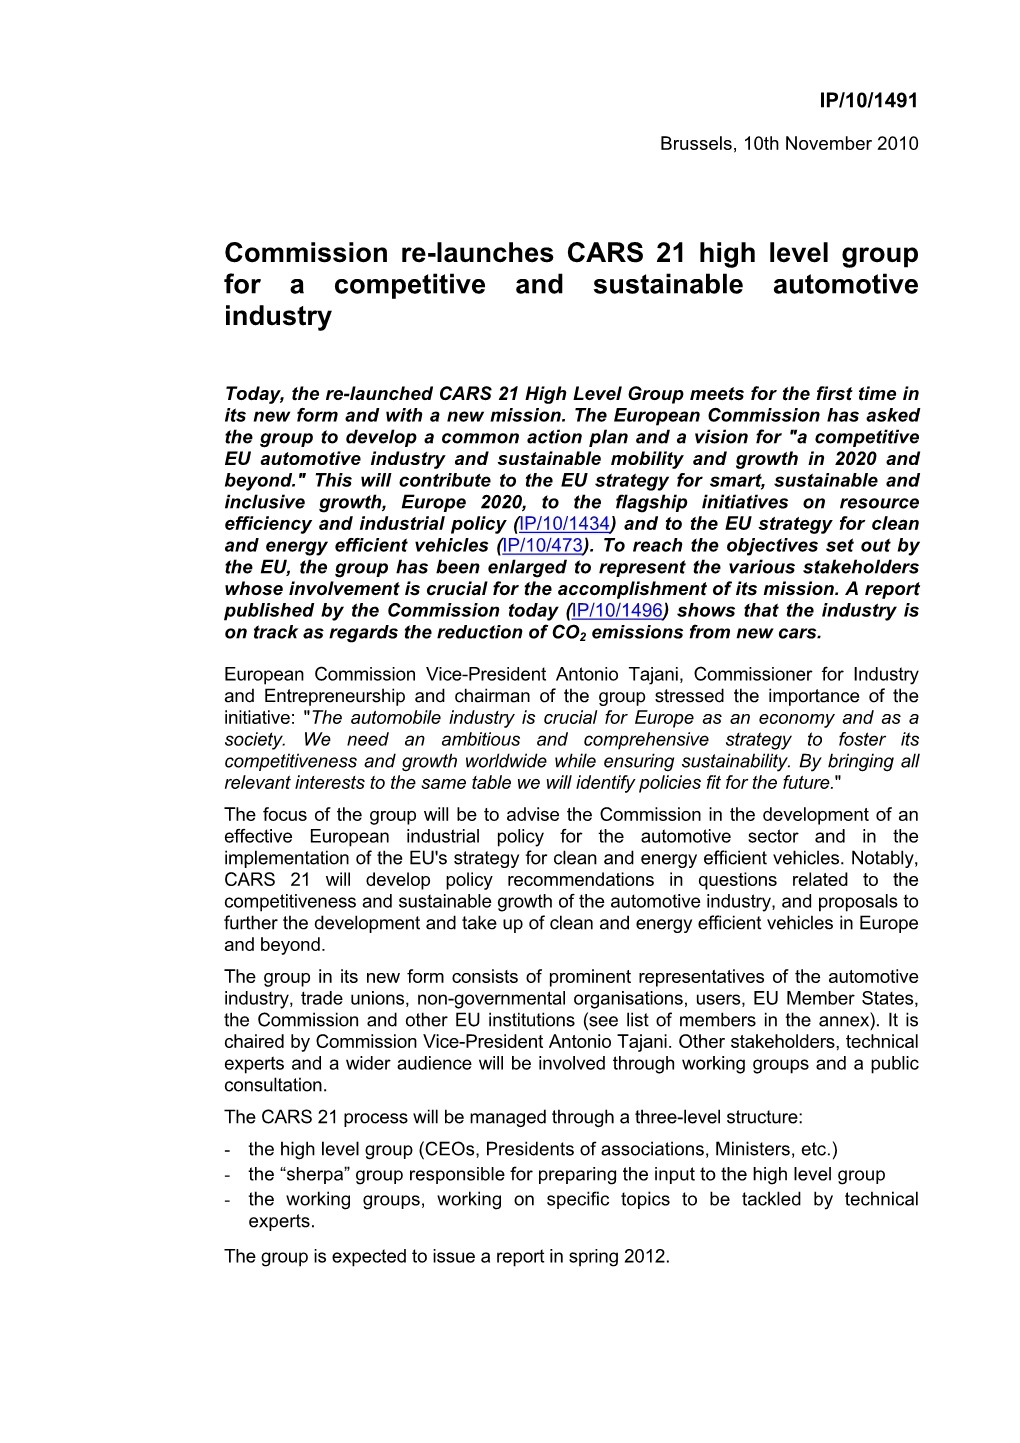 Commission Re-Launches CARS 21 High Level Group for a Competitive and Sustainable Automotive Industry